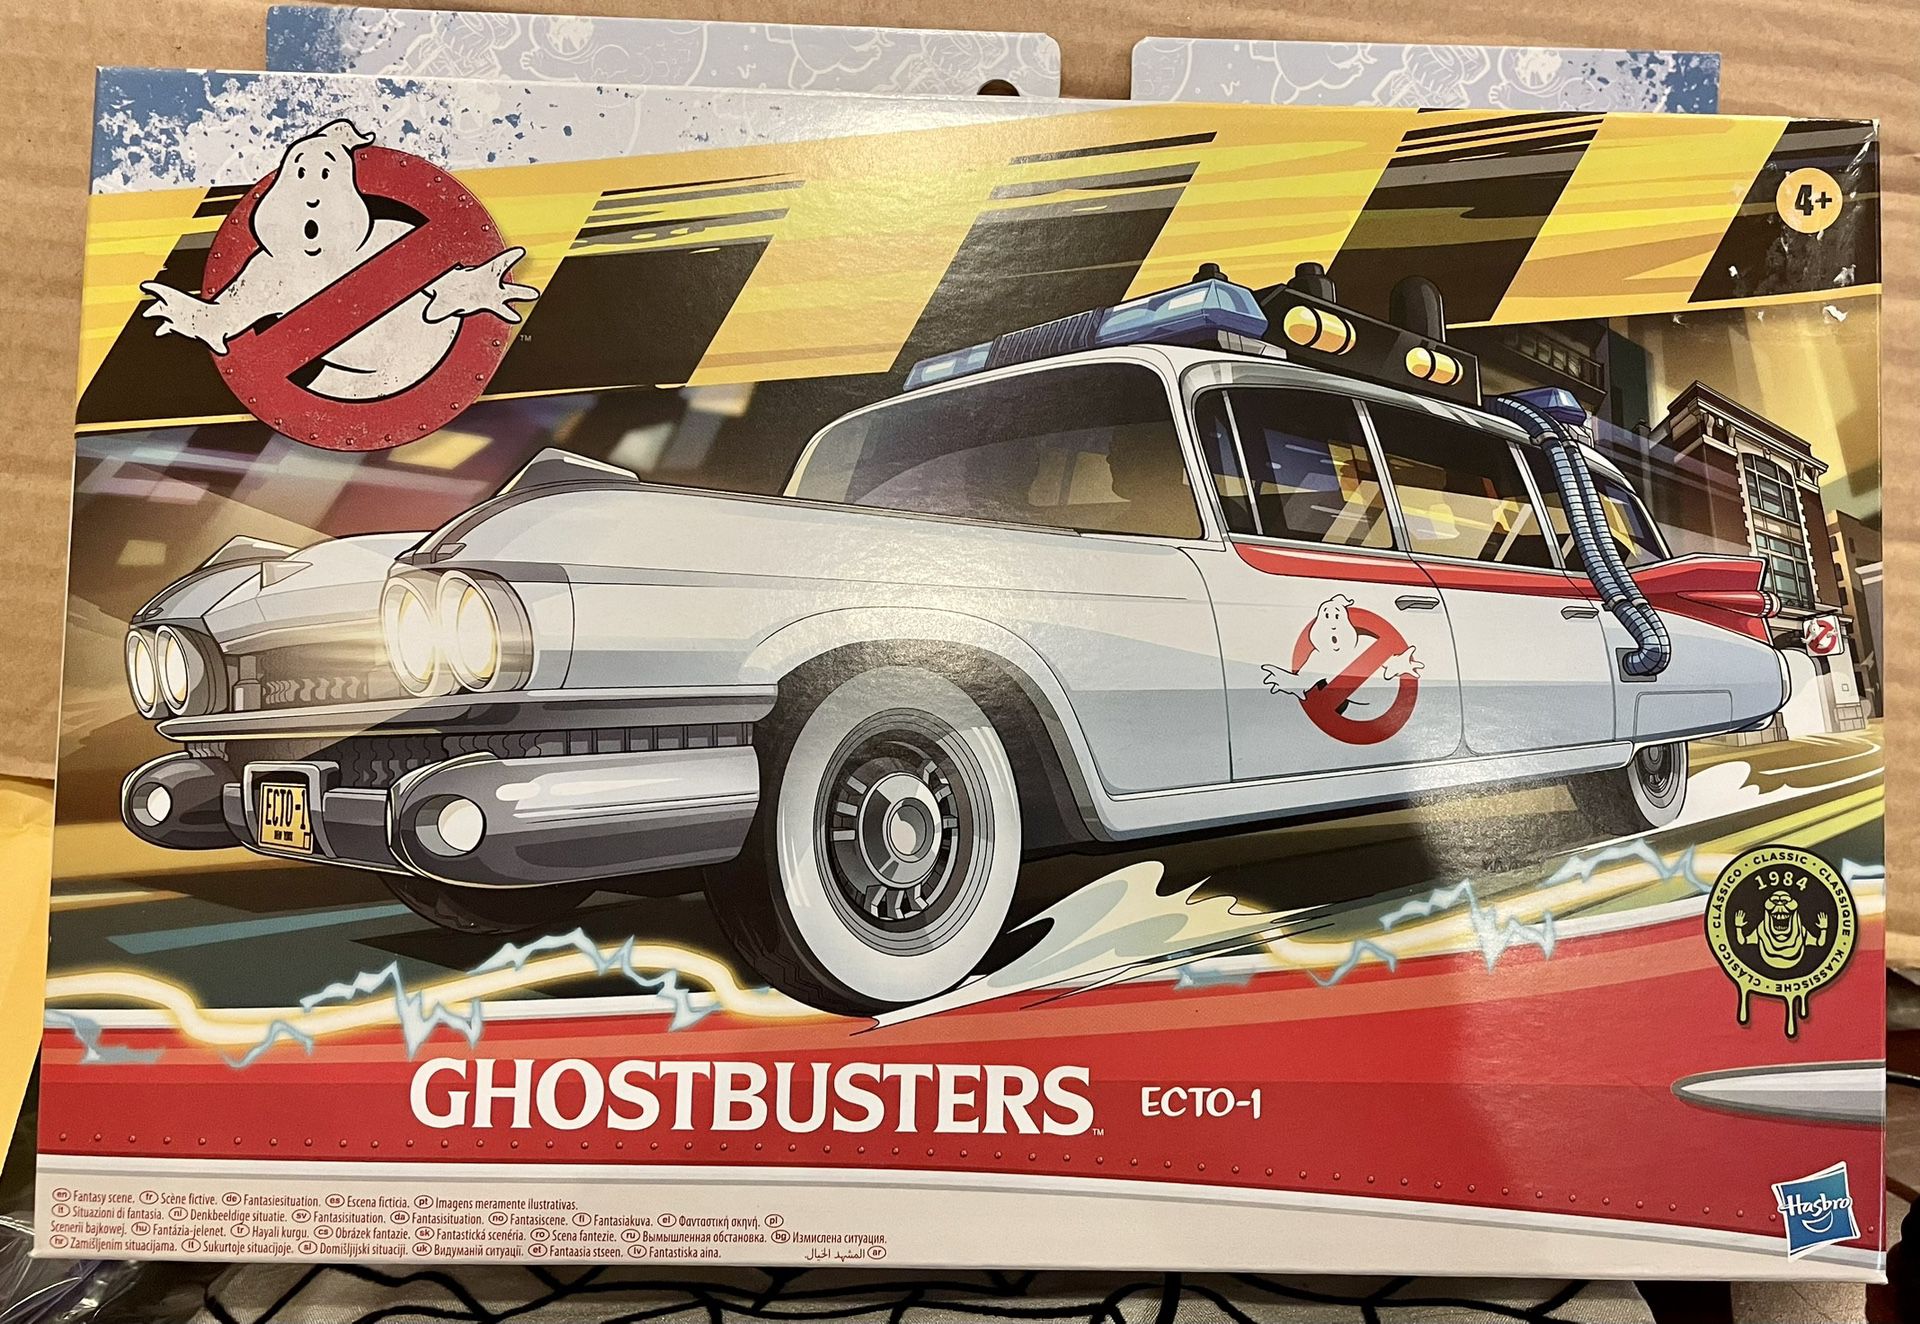 Ghostbusters Ecto-1 Car